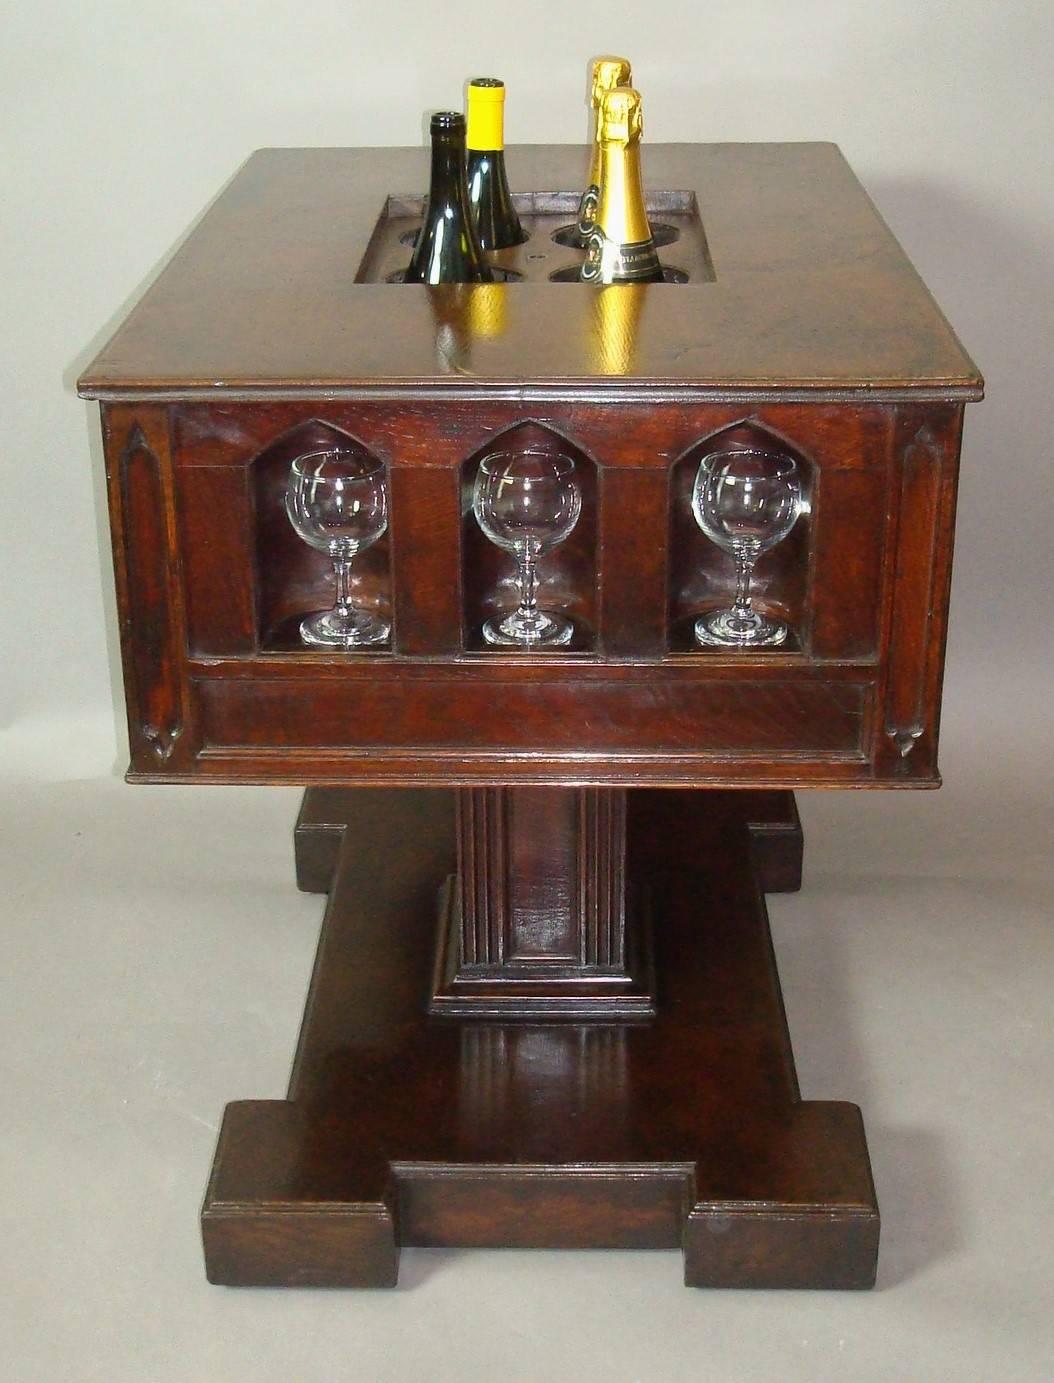 19th century Gothic oak champagne or wine cooler table; this very unusual table was almost certainly made as a wine or champagne tasting table for a Gothic influenced French chateaux. The rectangular top with a moulded edge and a central lift out